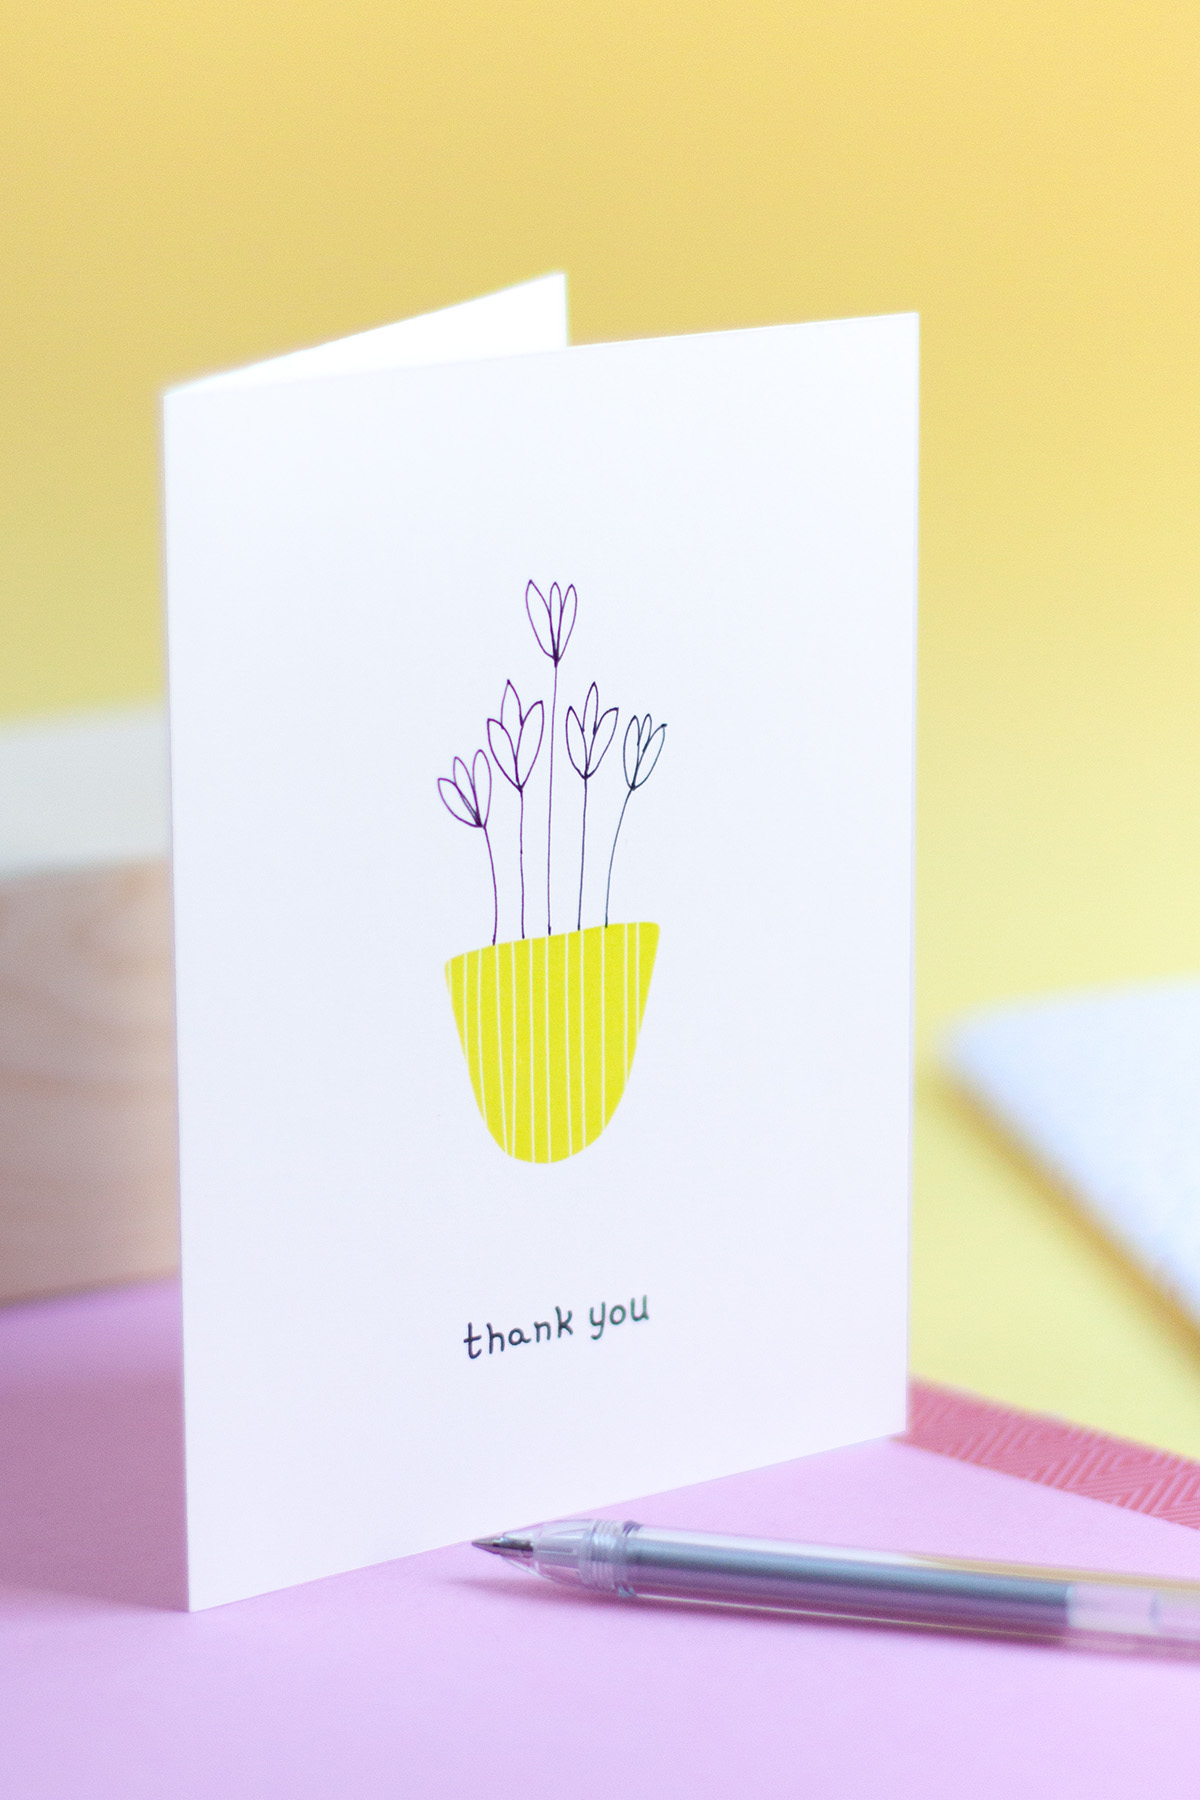 Finsihed thank you card